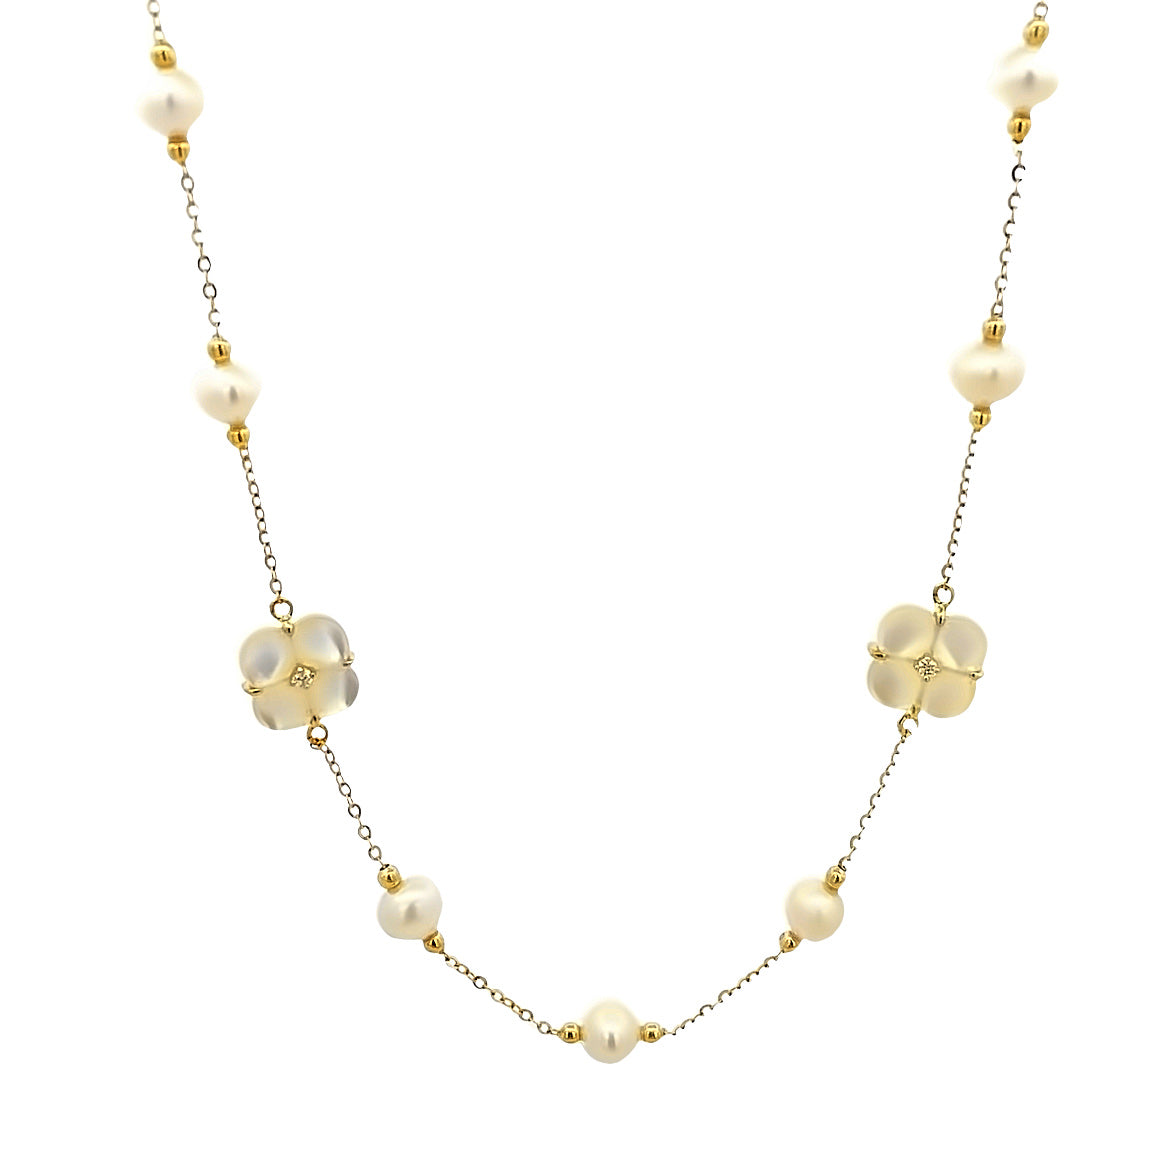 18K GOLD FLOWER SMALL MOTHER OF PEARL FLOWER AND PEARLS NECKLACE